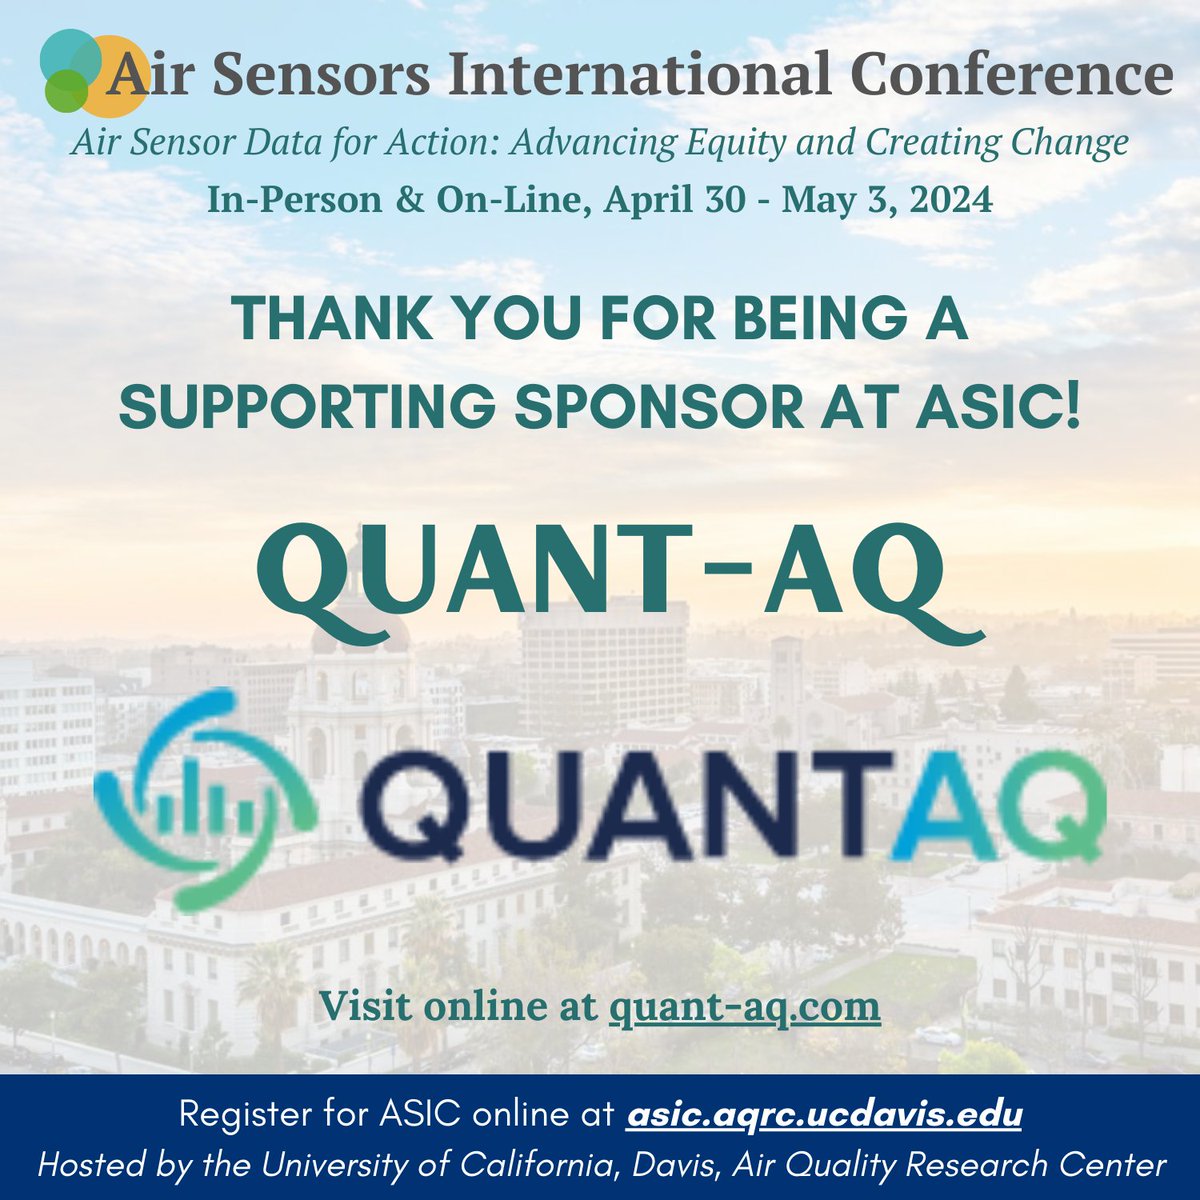 Thank you to QuantAQ for being a supporting sponsor at ASIC California 2024! Learn more about them at quant-aq.com. #QuantAQ #ASIC2024 #airquality #airsensors #lowcostsensors #airpollution #lowcostsensors #communityscience